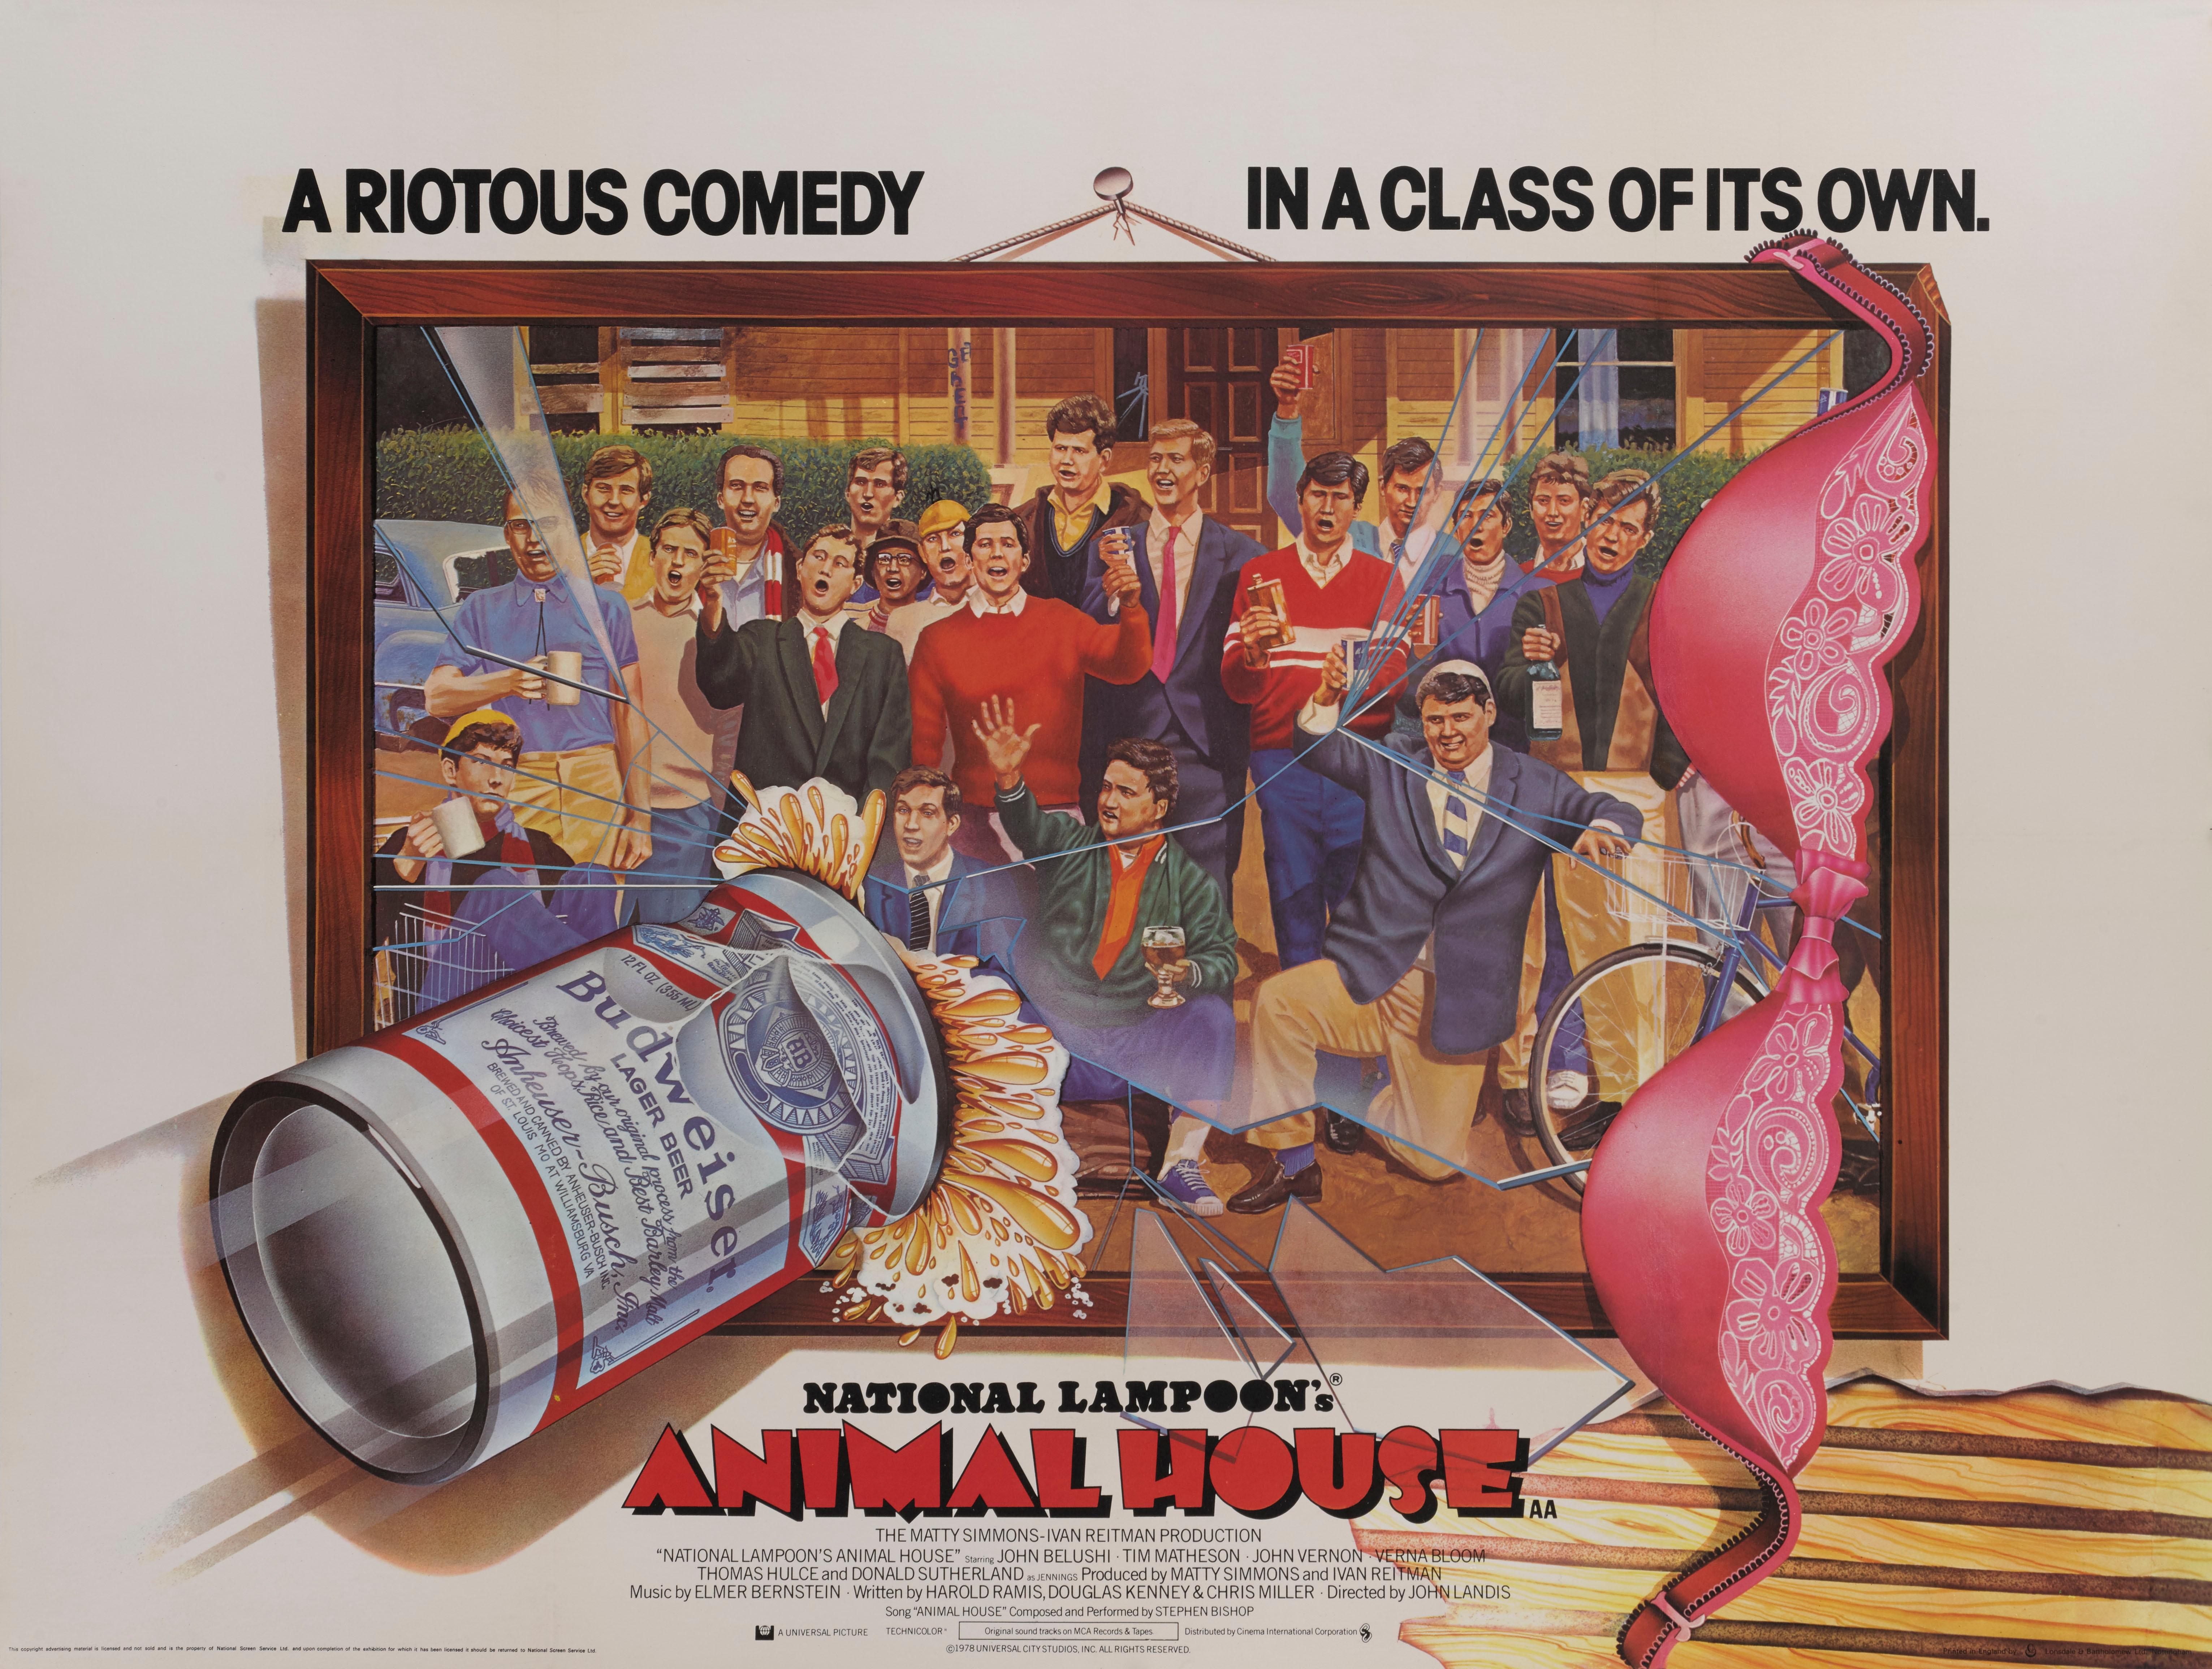 Original British film poster for the 1978 comedy Animal House.
The film was directed Liliana John Landis and starred John Belushi, Tim Matheson This poster is conservation line backed and would be shipped rolled in a strong tube.